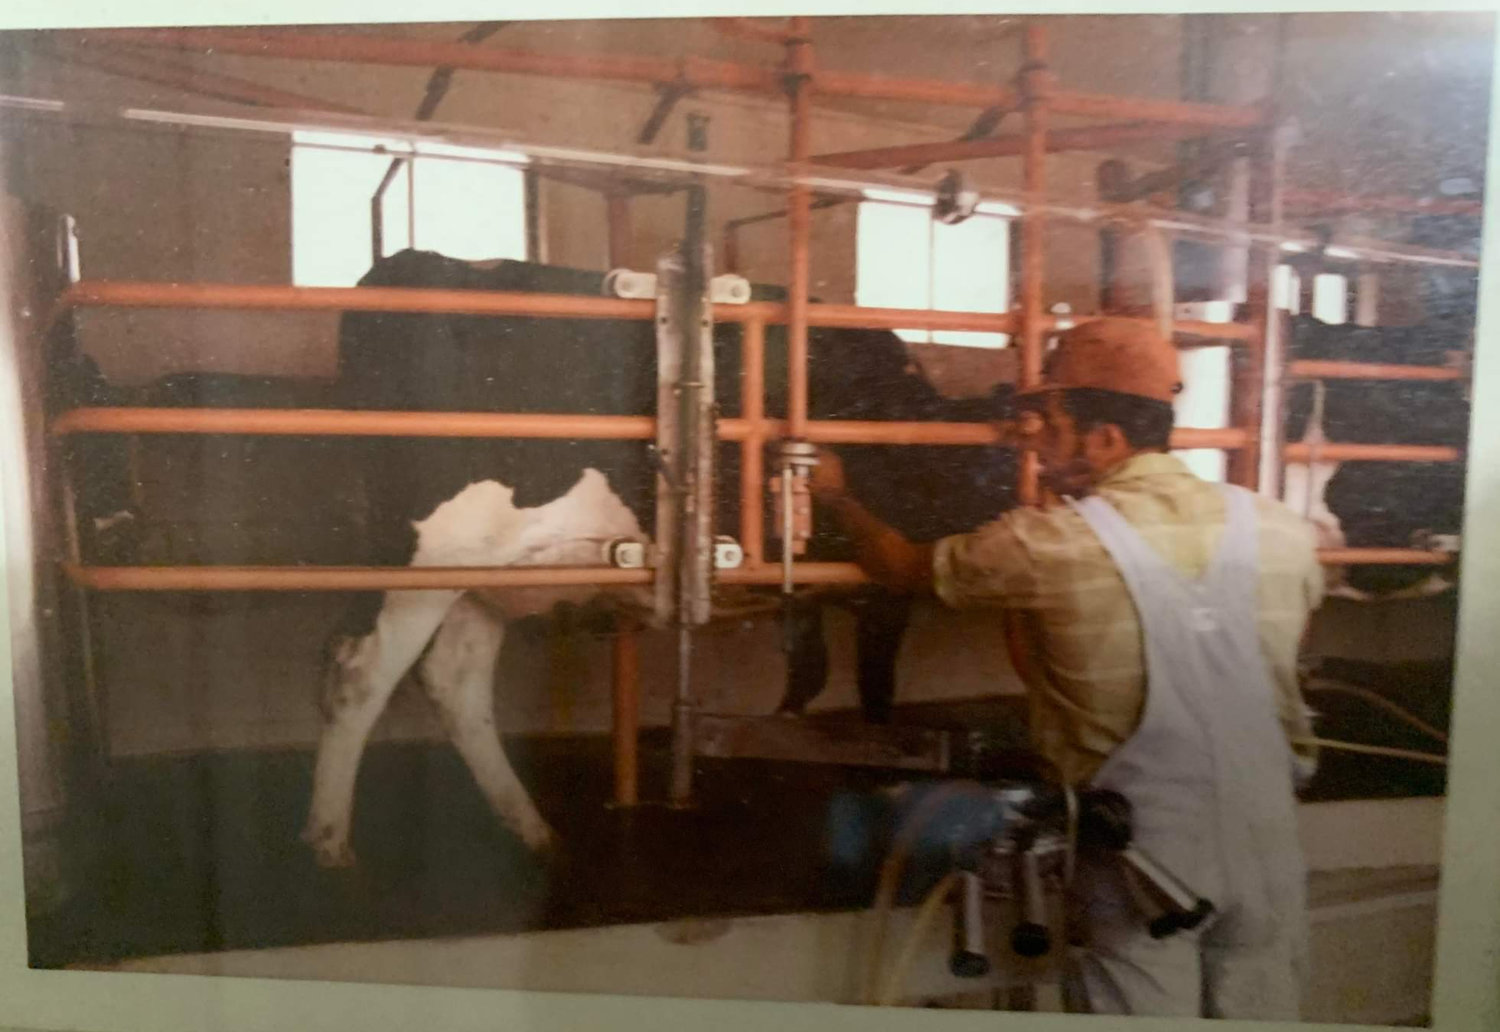 Dug up from the Blankenship archives, here is Ronald Blankenship seen getting one of the dairy cows out so he can get started milking another one. Back in the day things had to keep MOOving.